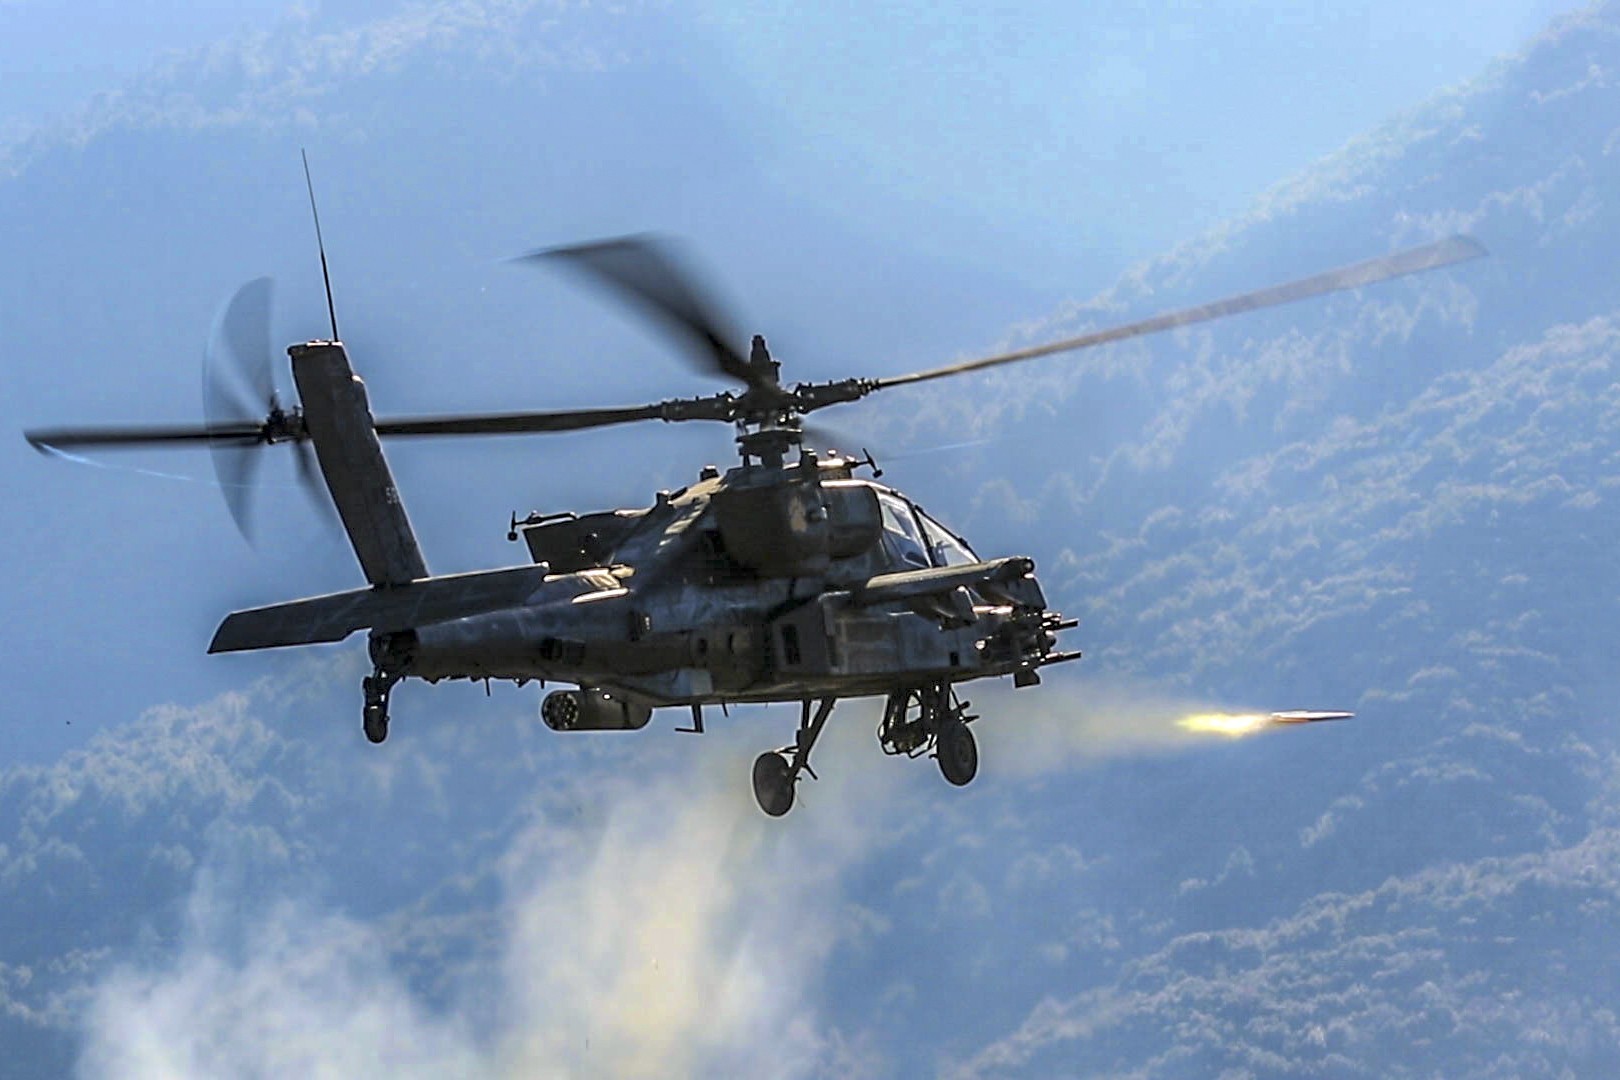 Why Army helicopters have Native American names. Article. The United States Army